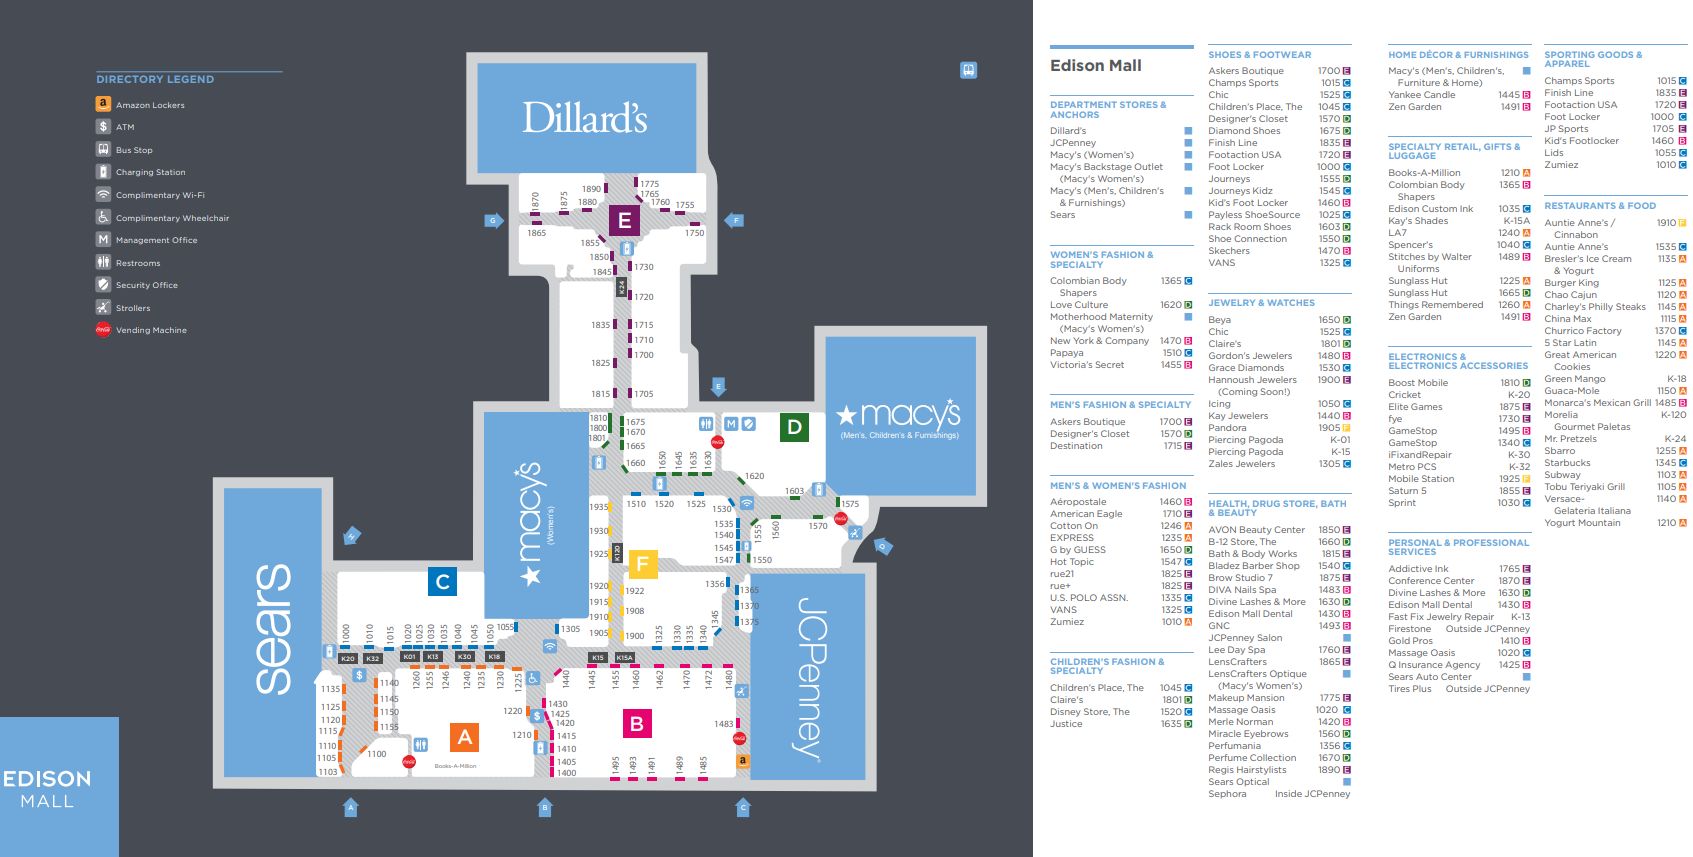 Edison Mall (123 stores) - shopping in 